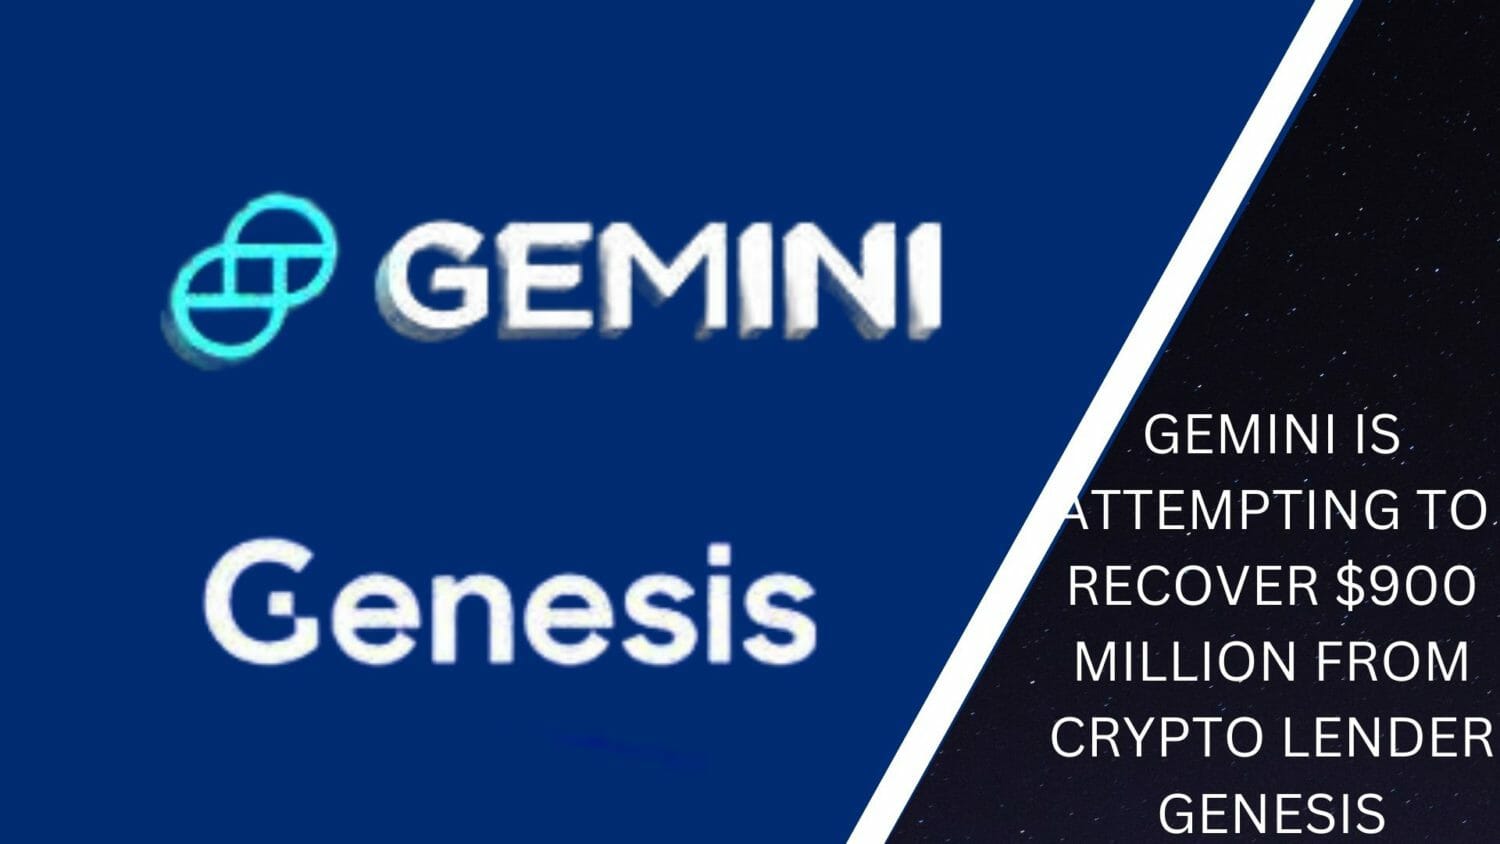 Gemini Is Attempting To Recover $900 Million From Crypto Lender Genesis